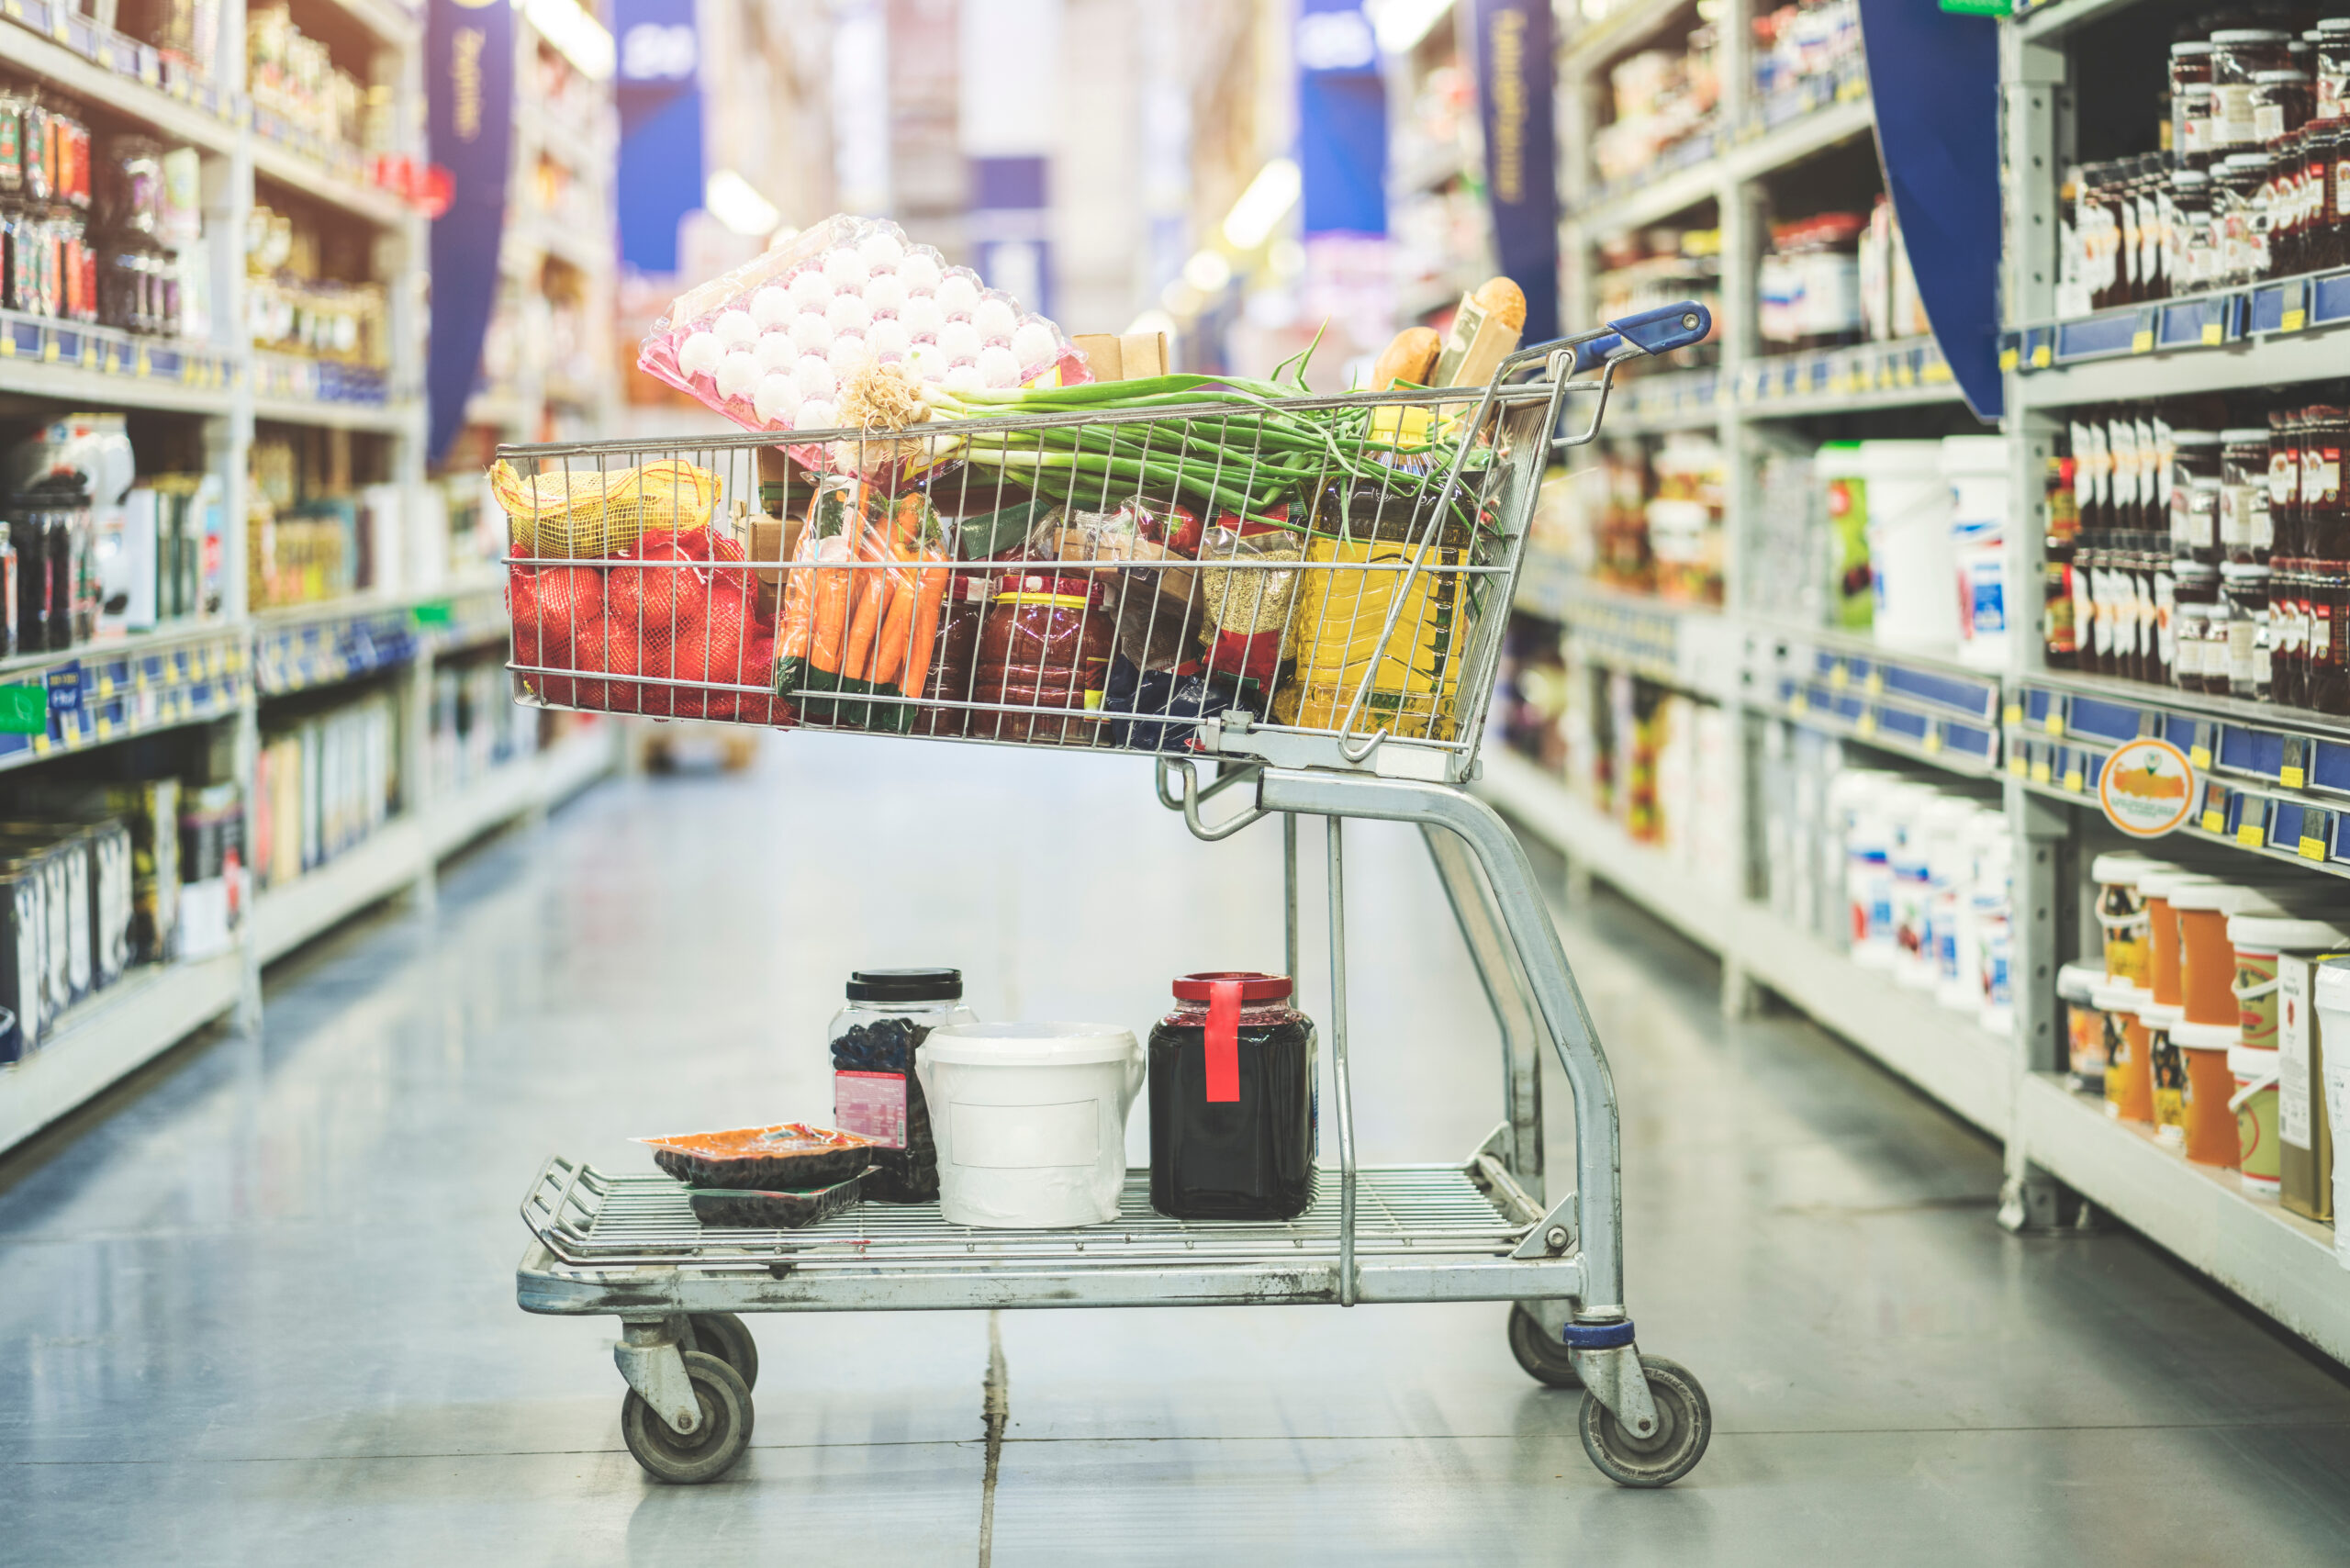 When Do Grocery Stores Restock? A Simple Guide – Instacart